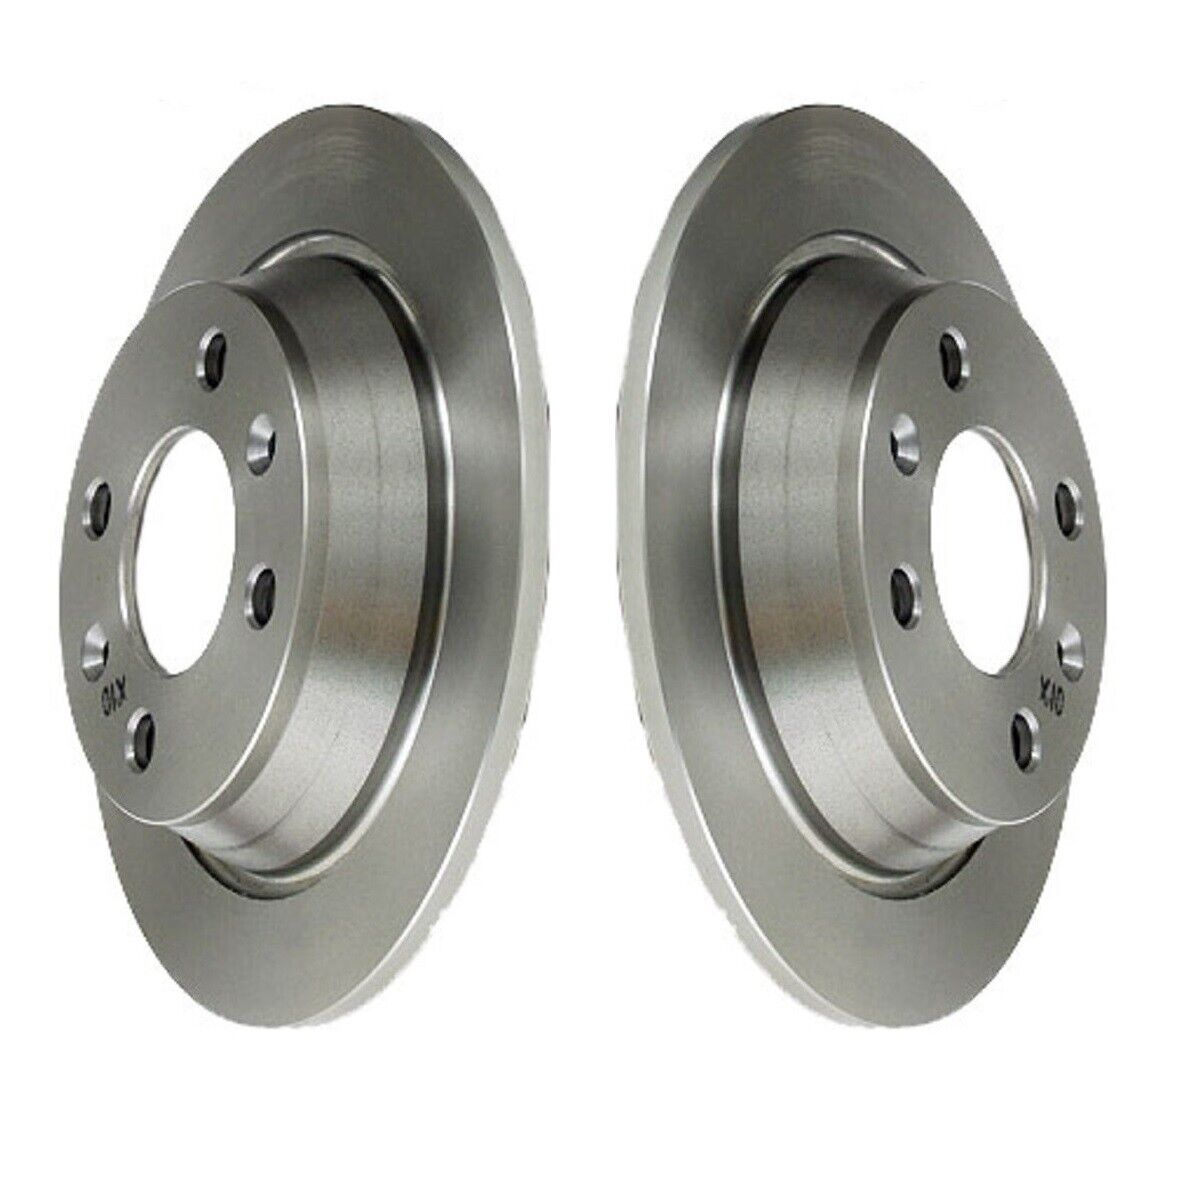 Brembo Pair Set of 2 Rear Left & Right Solid Brake Disc Rotors For Saab 900 9000